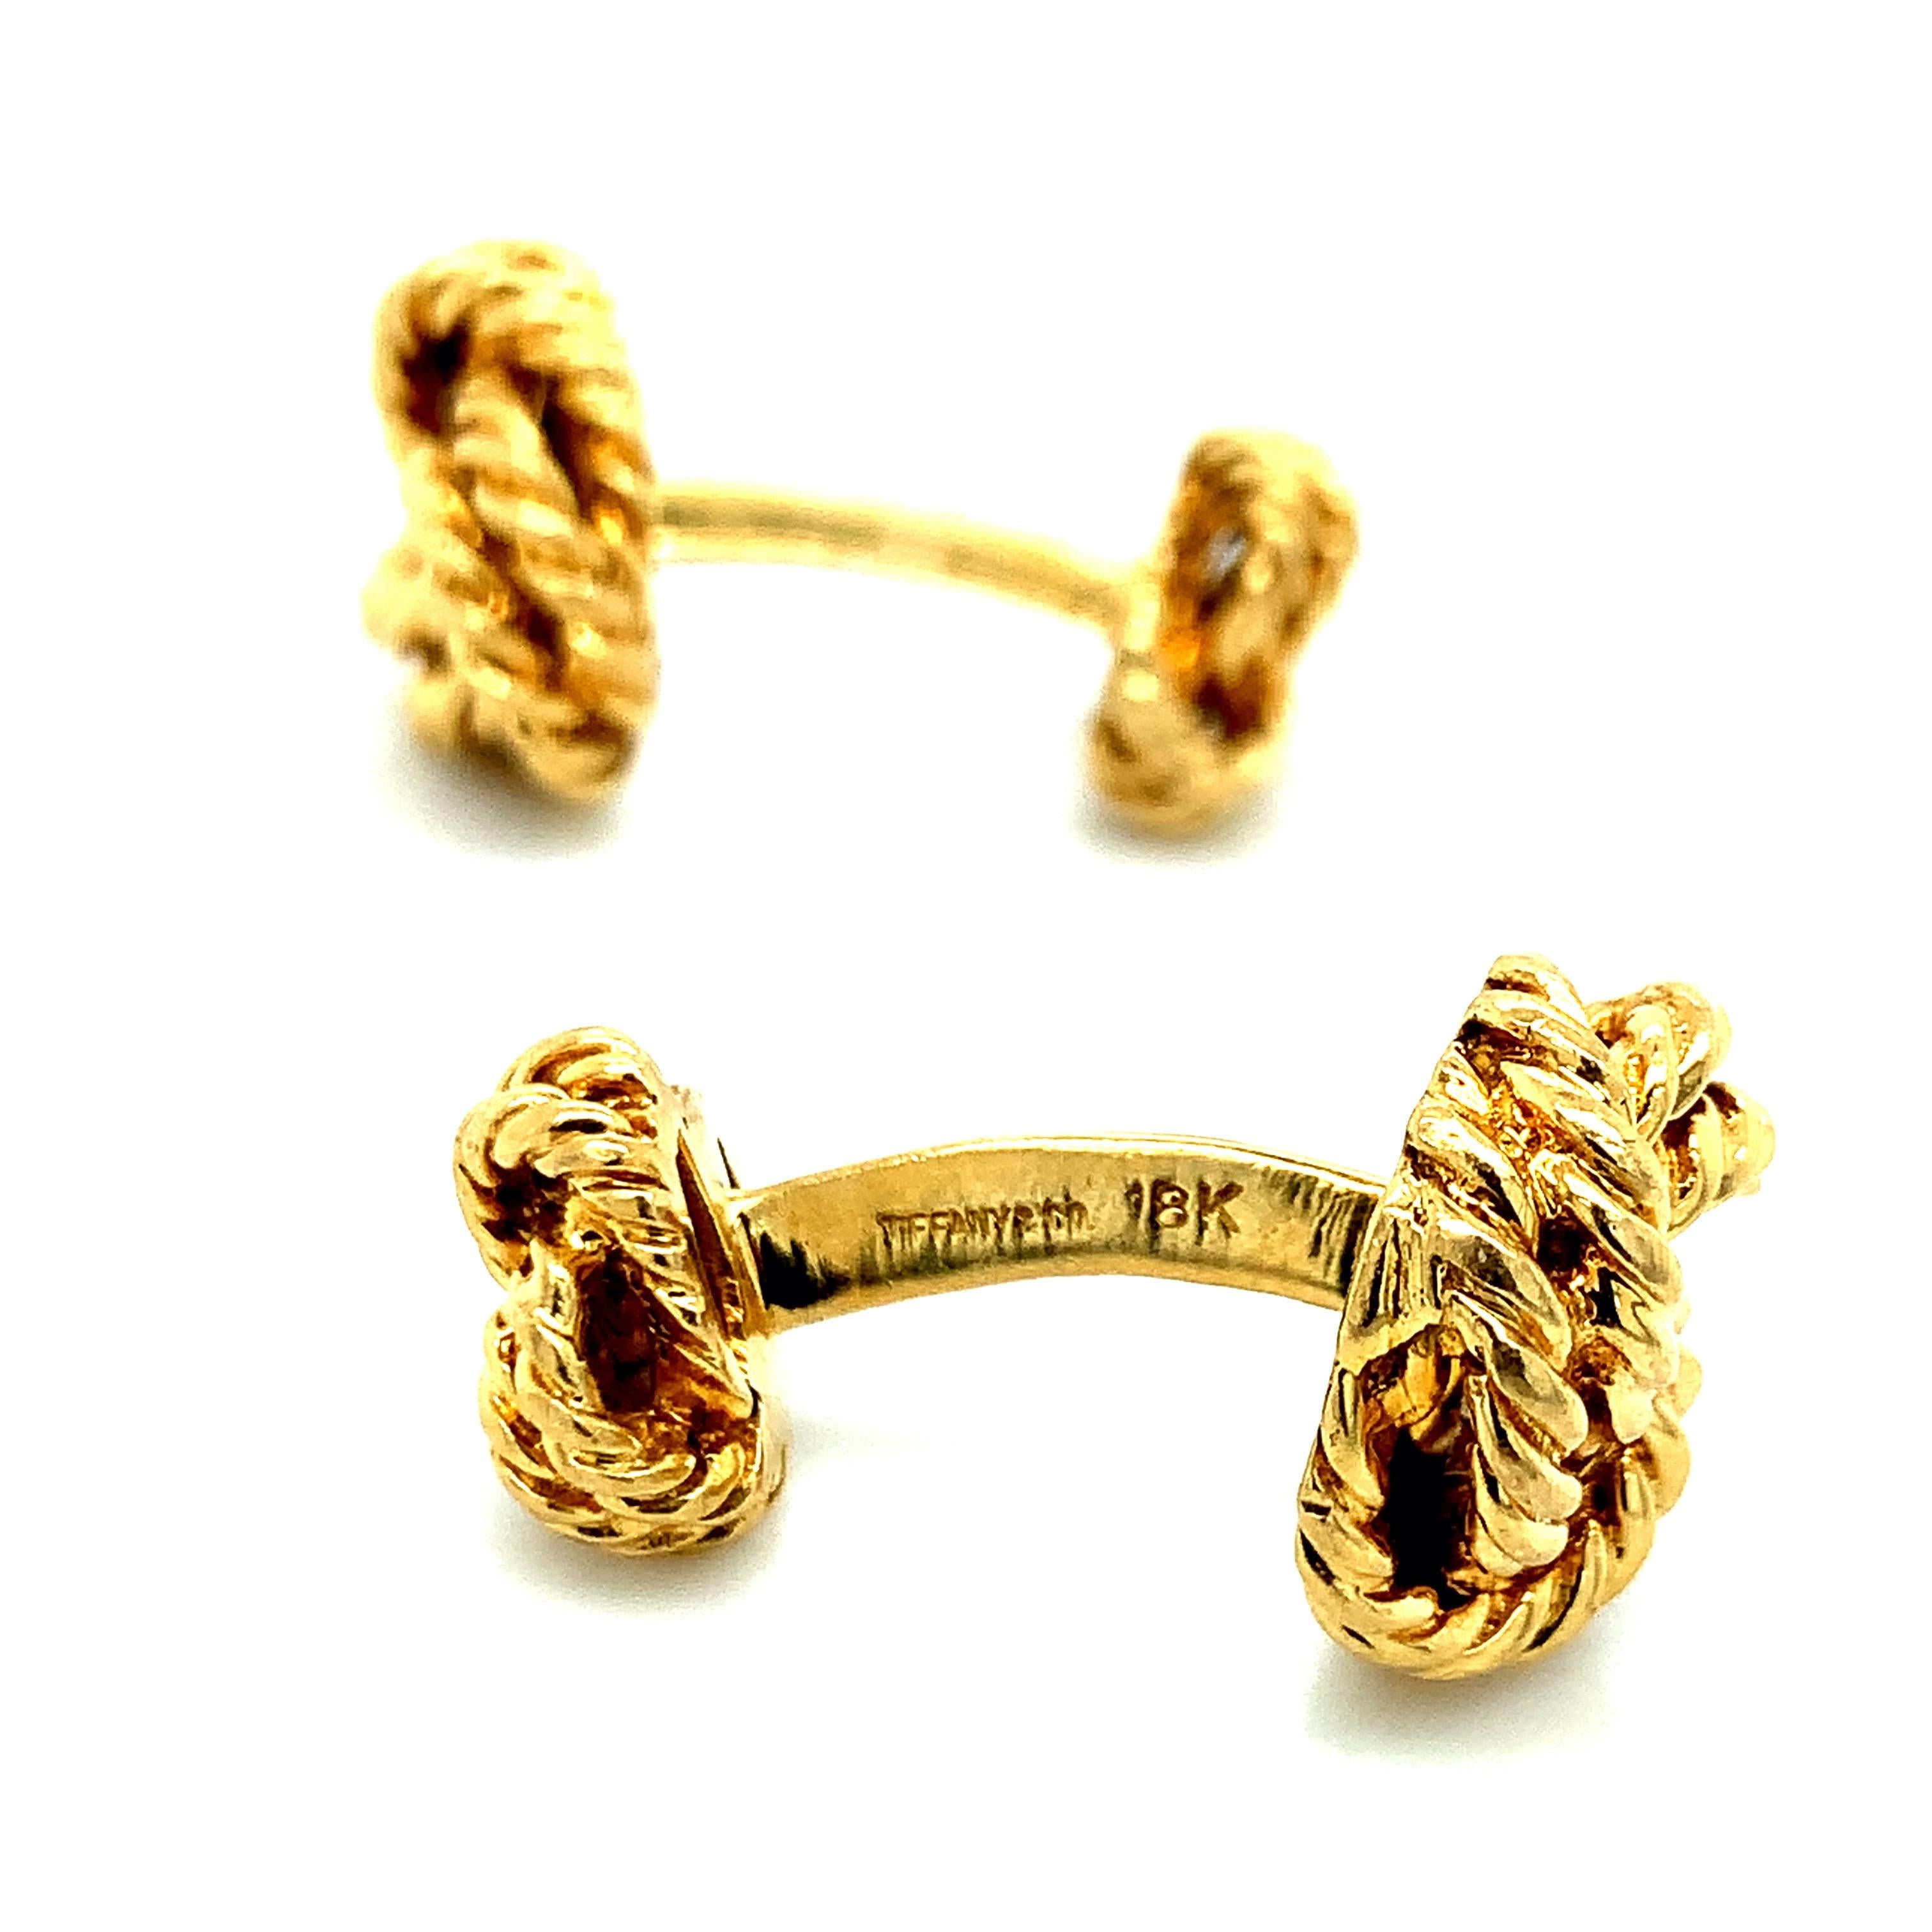 Tiffany & Co. Yellow Gold Rope Cufflinks For Sale 1